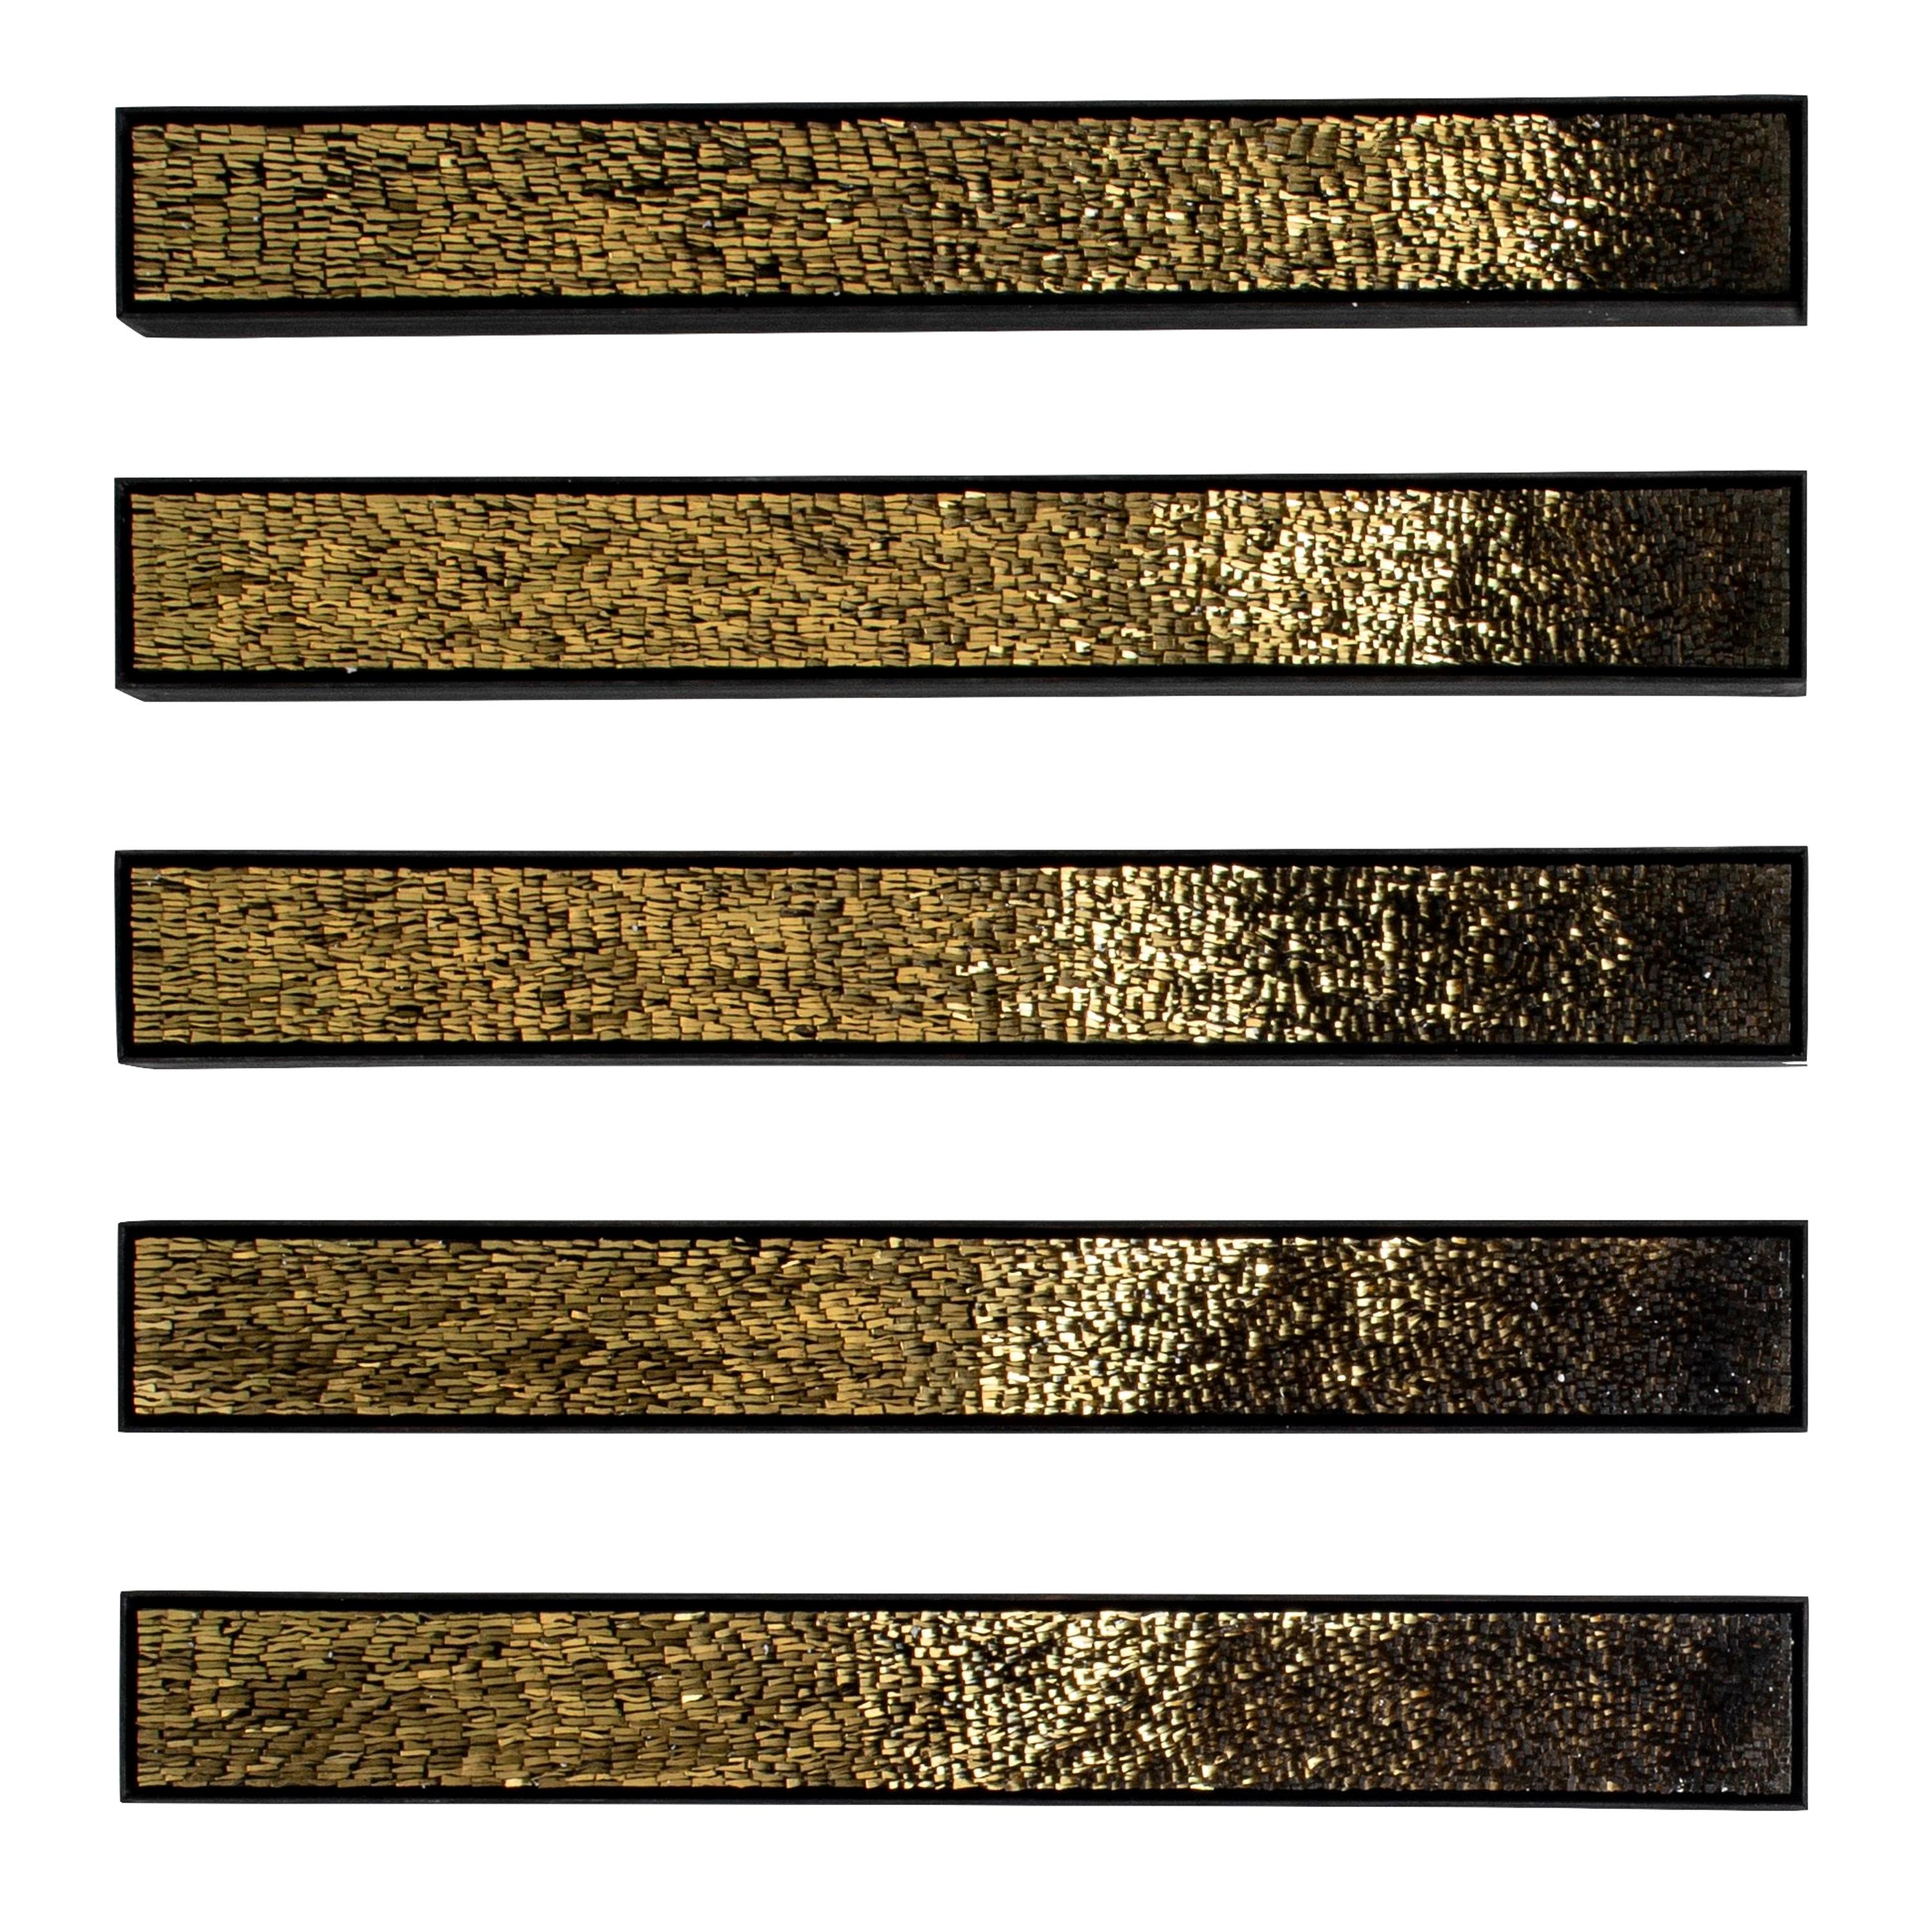 Hand applied 24-karat gold leaf Venetian glass mosaic, set in mortar with an iron frame. By artists CaCO3. Can be arrange horizontal or vertical.

Sheets of Murano glass are backed with gold leaf and then chipped by hand to create individual